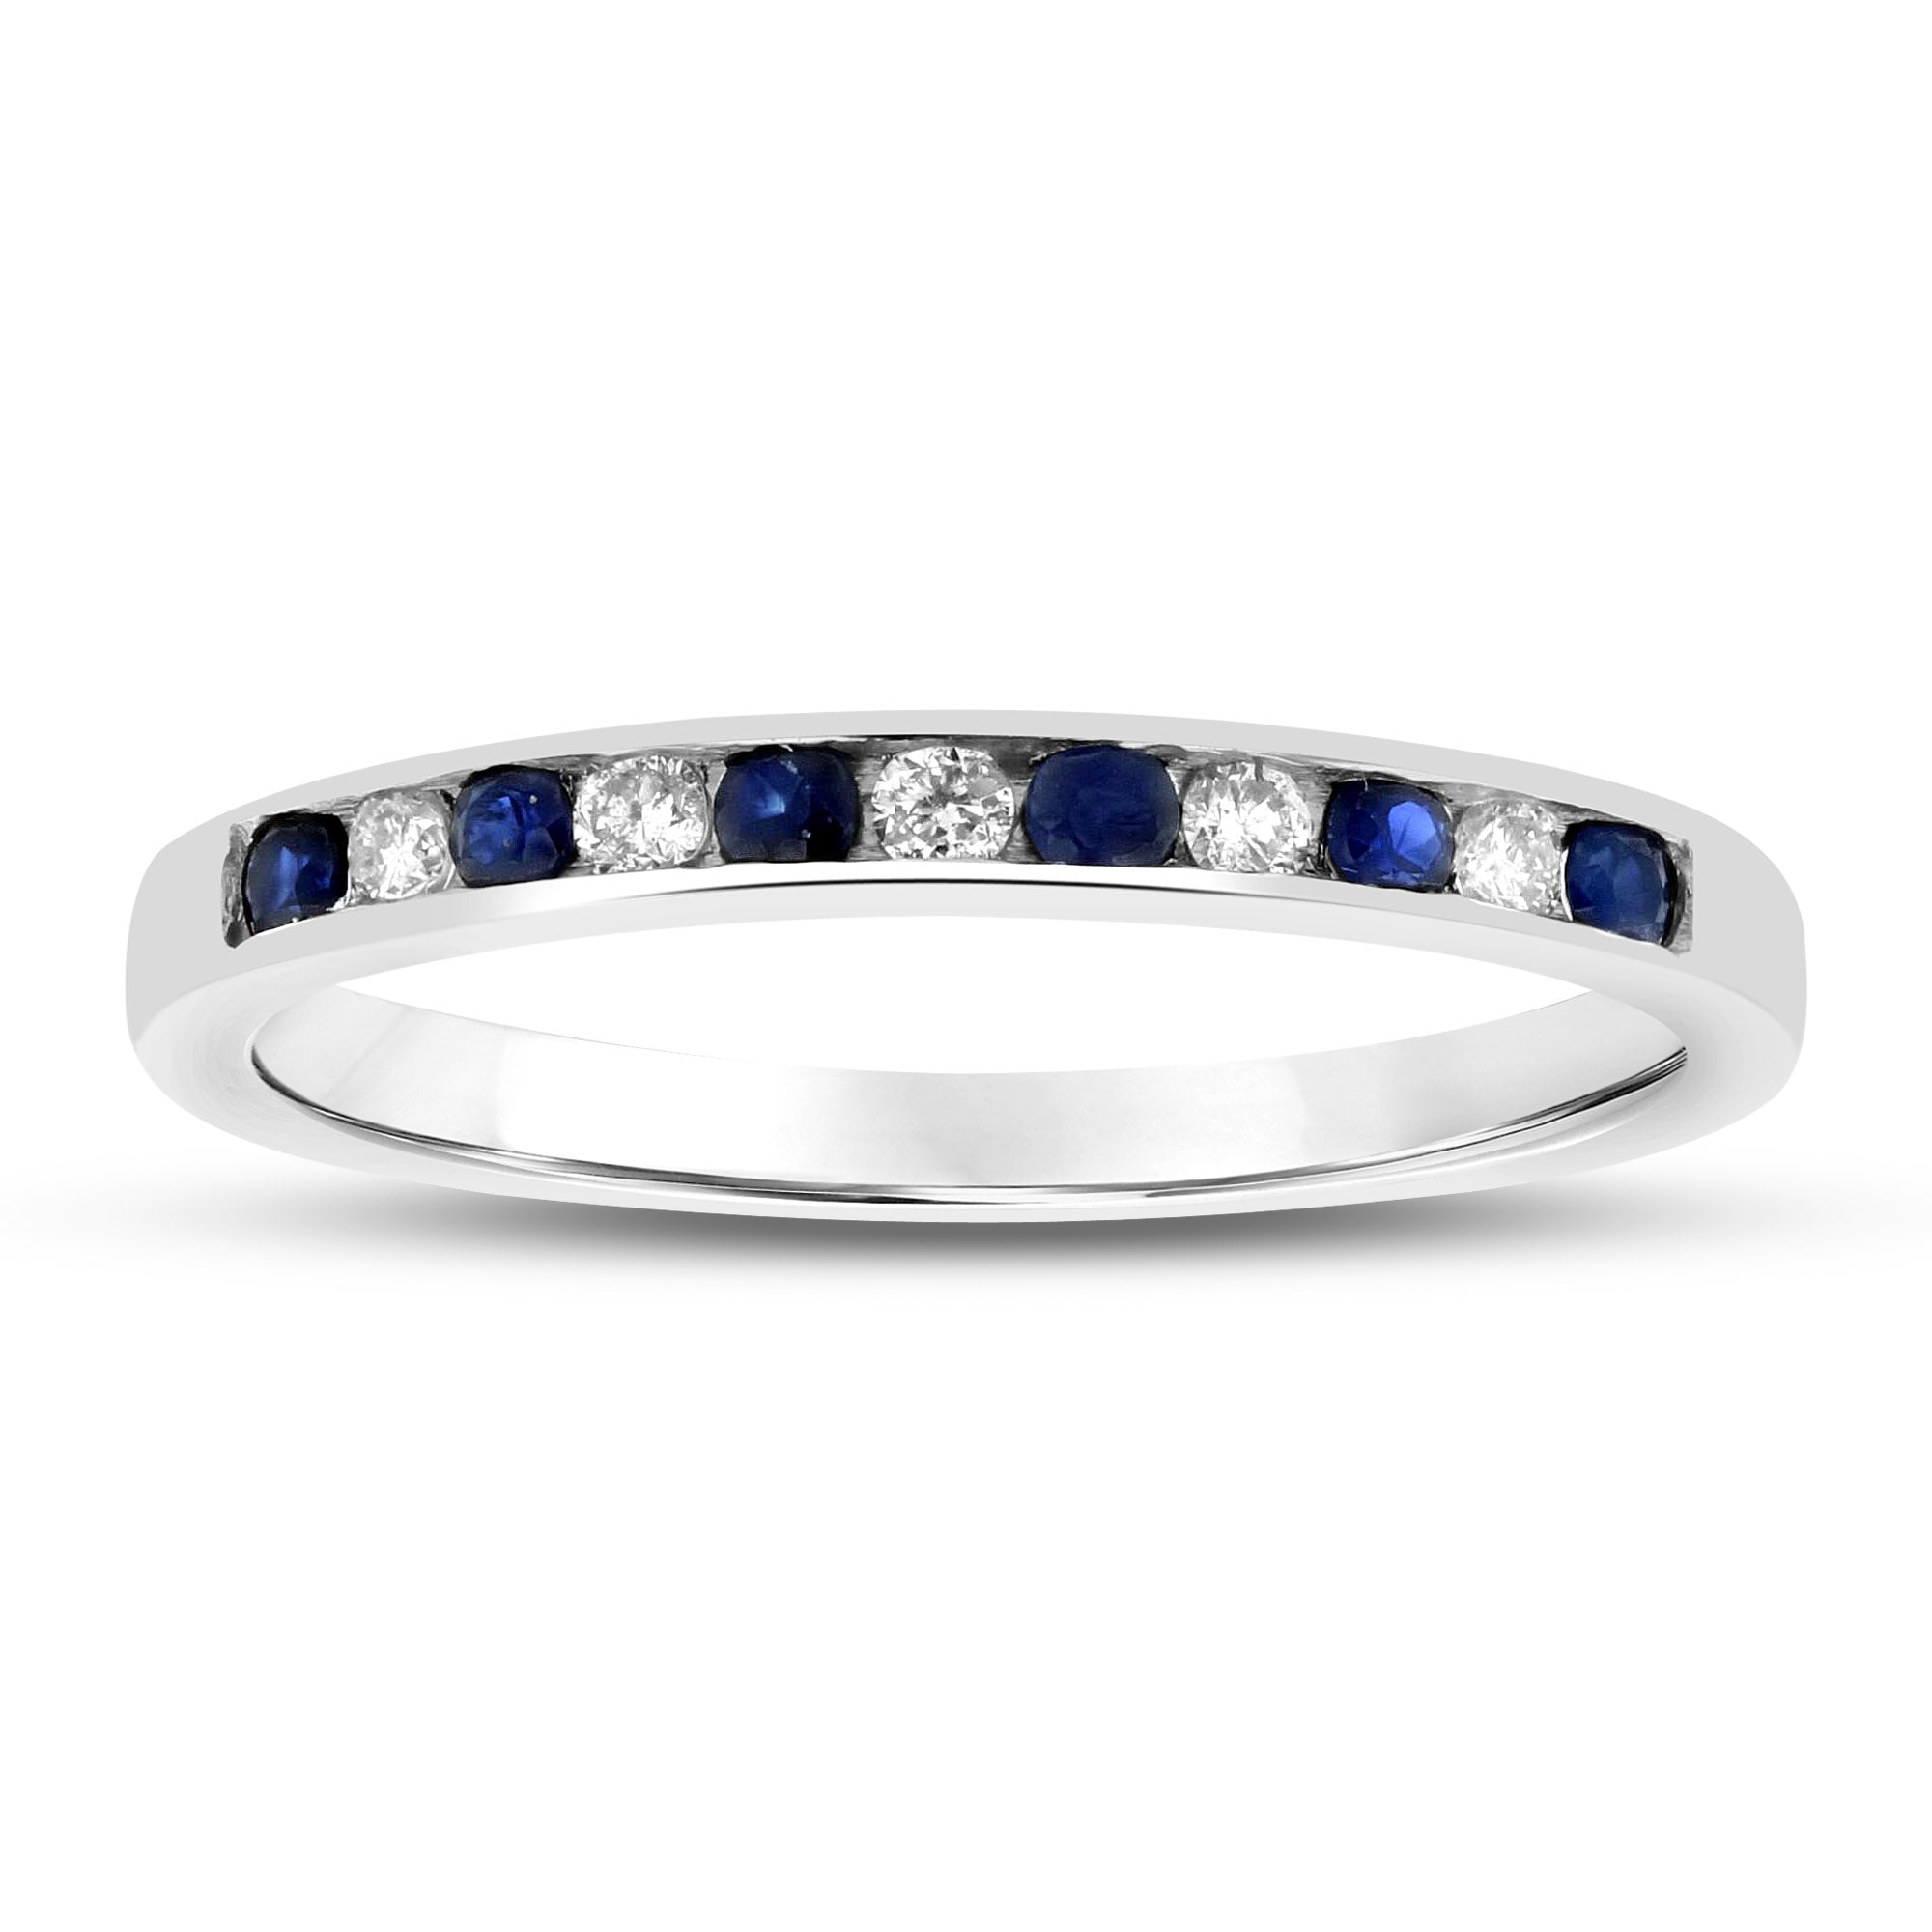 Diamond and Sapphire Band in 14k Gold 0.27 c.t.w.